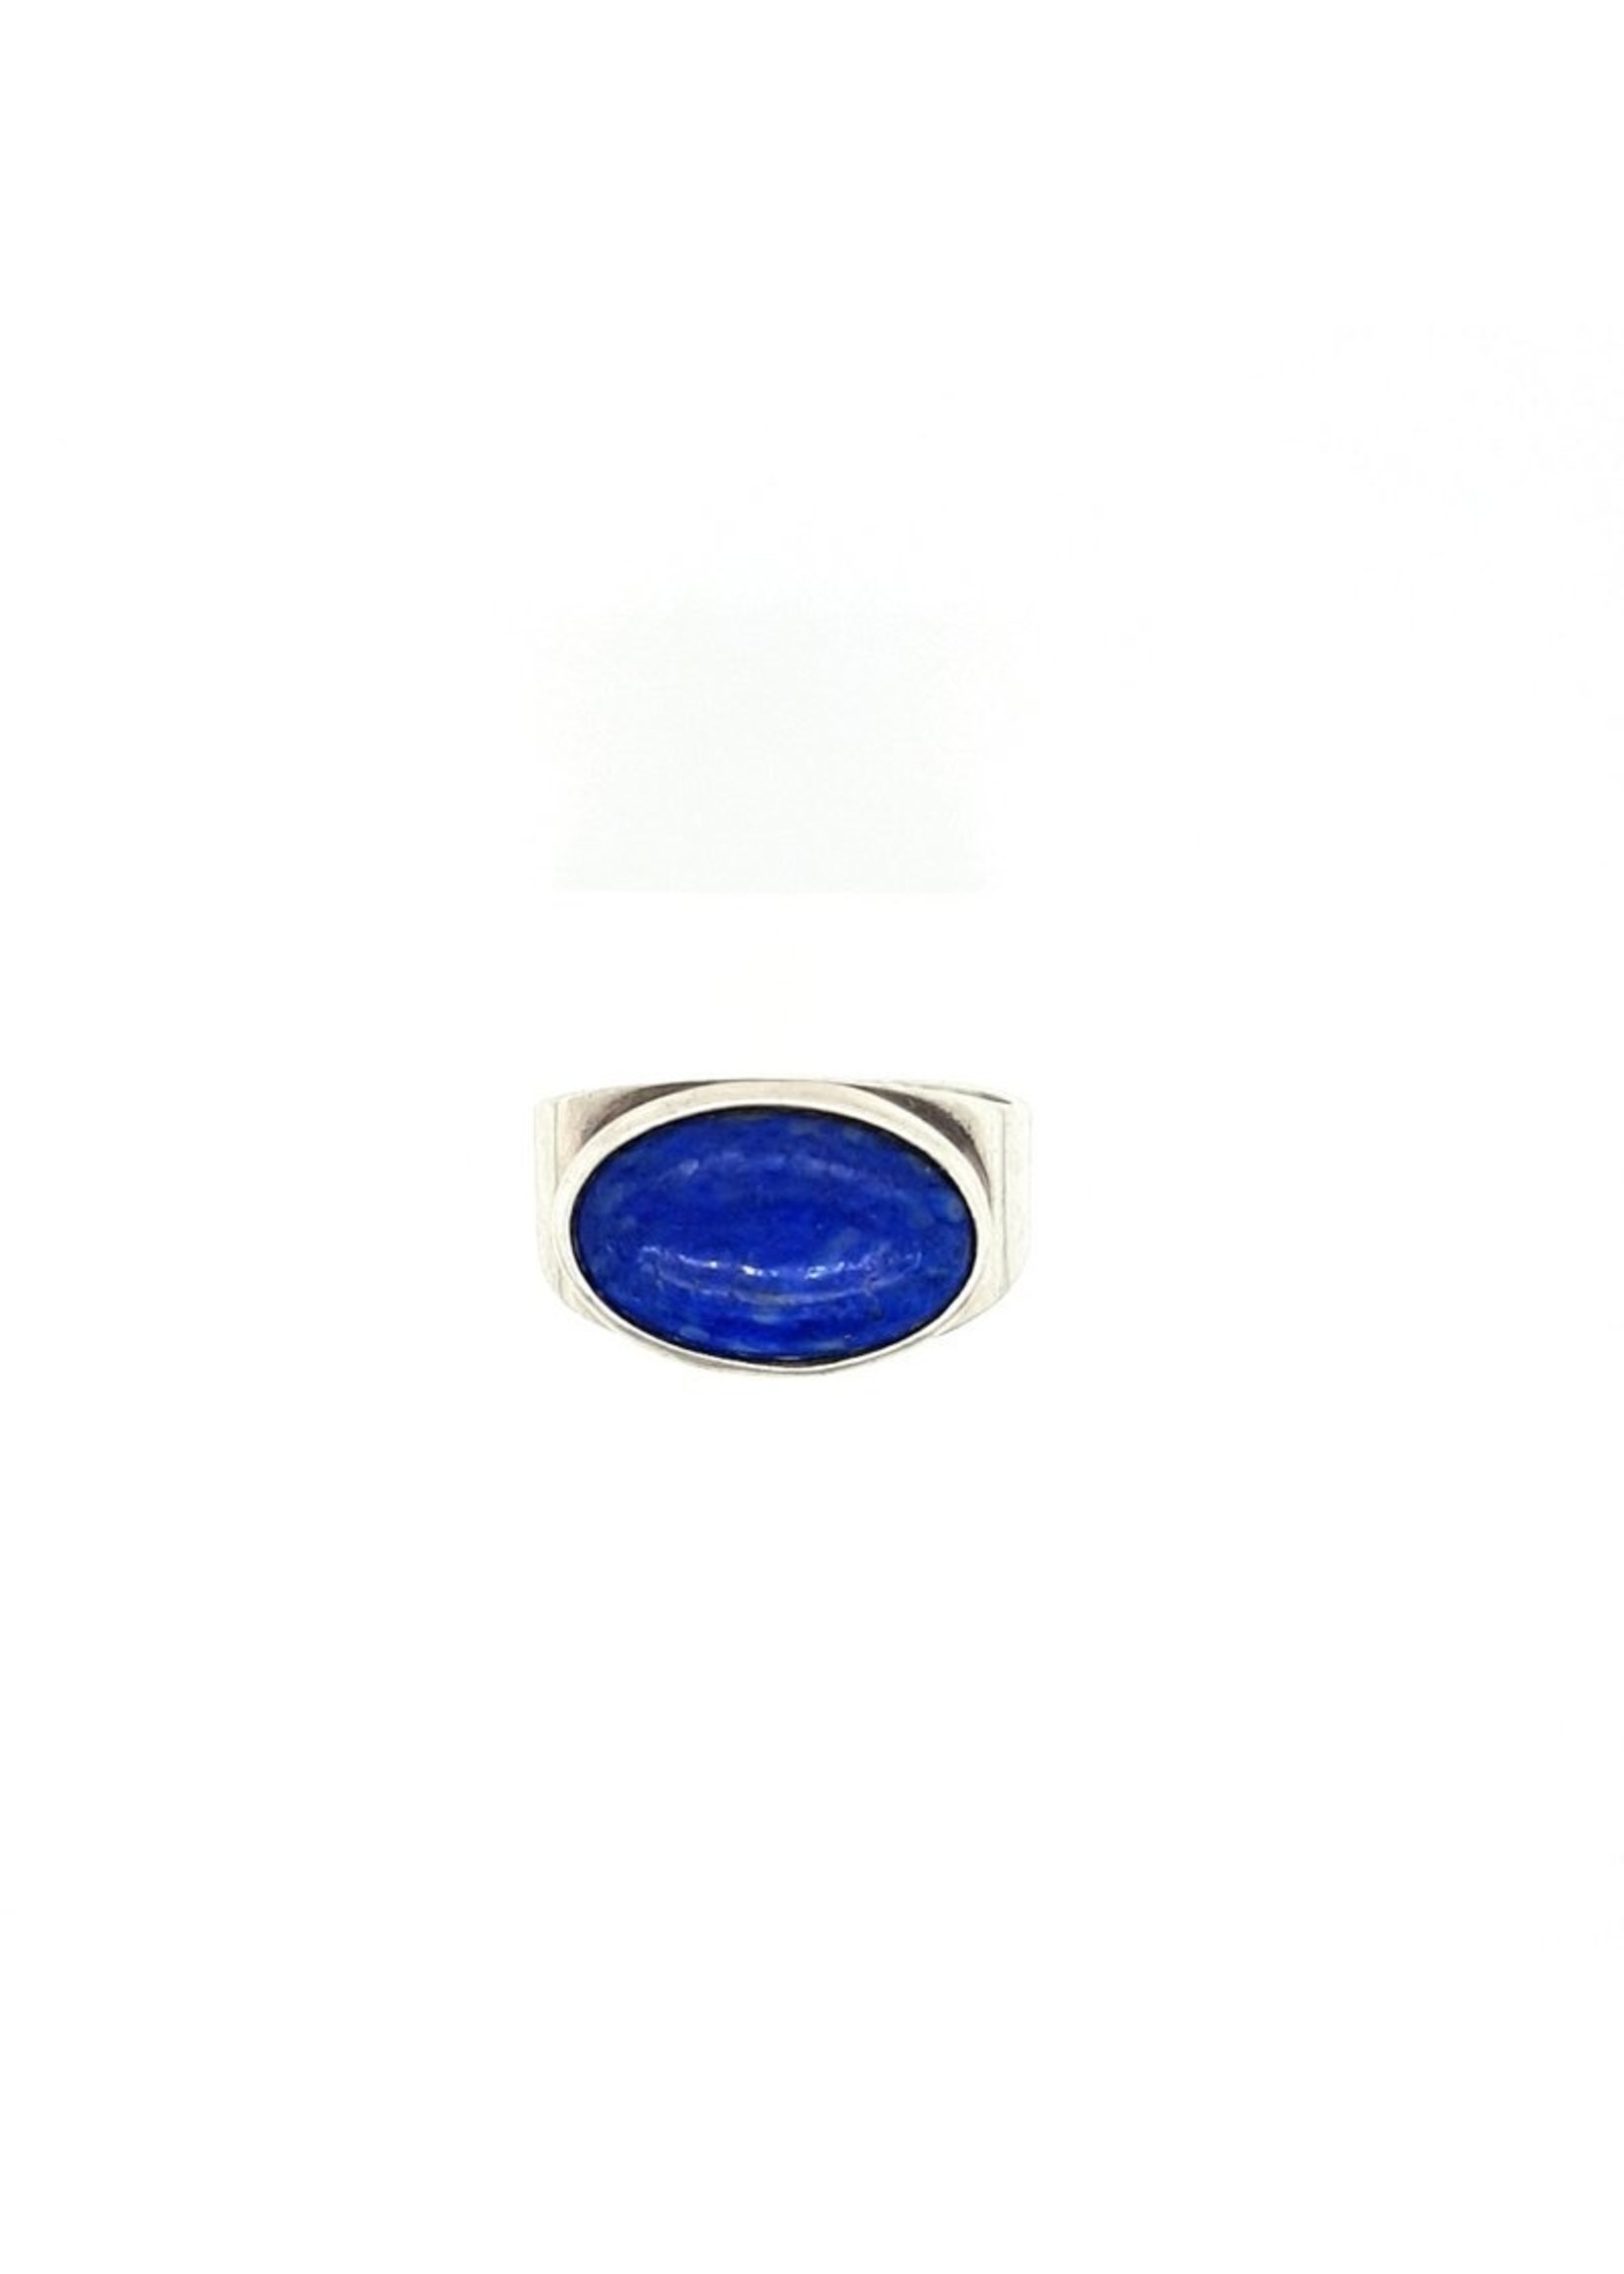 Vintage & Occasion Occassion ring met lapis lazuli edelsteen.